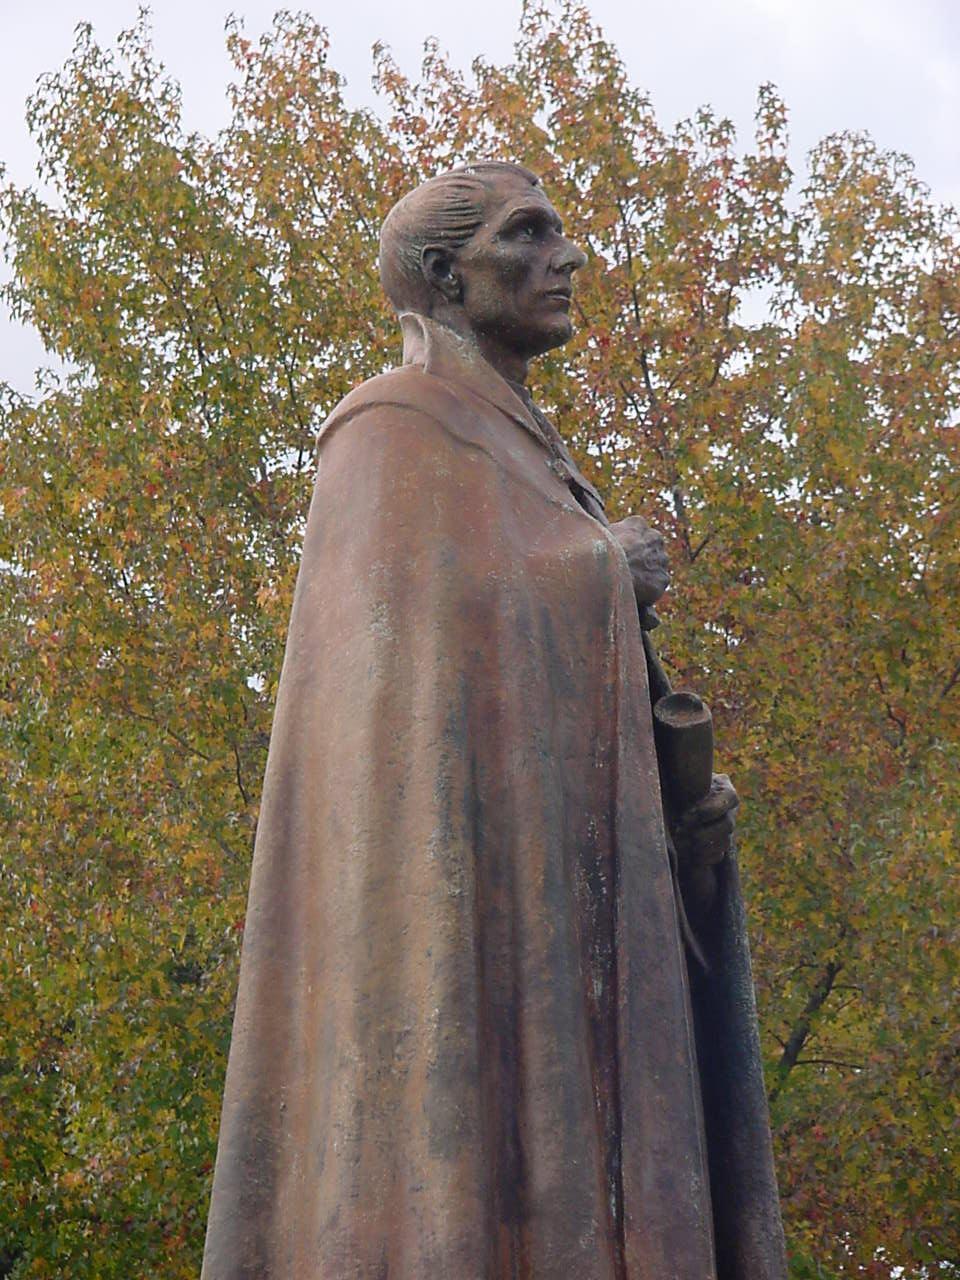 Statue of a man wearing a cloak with trees in background